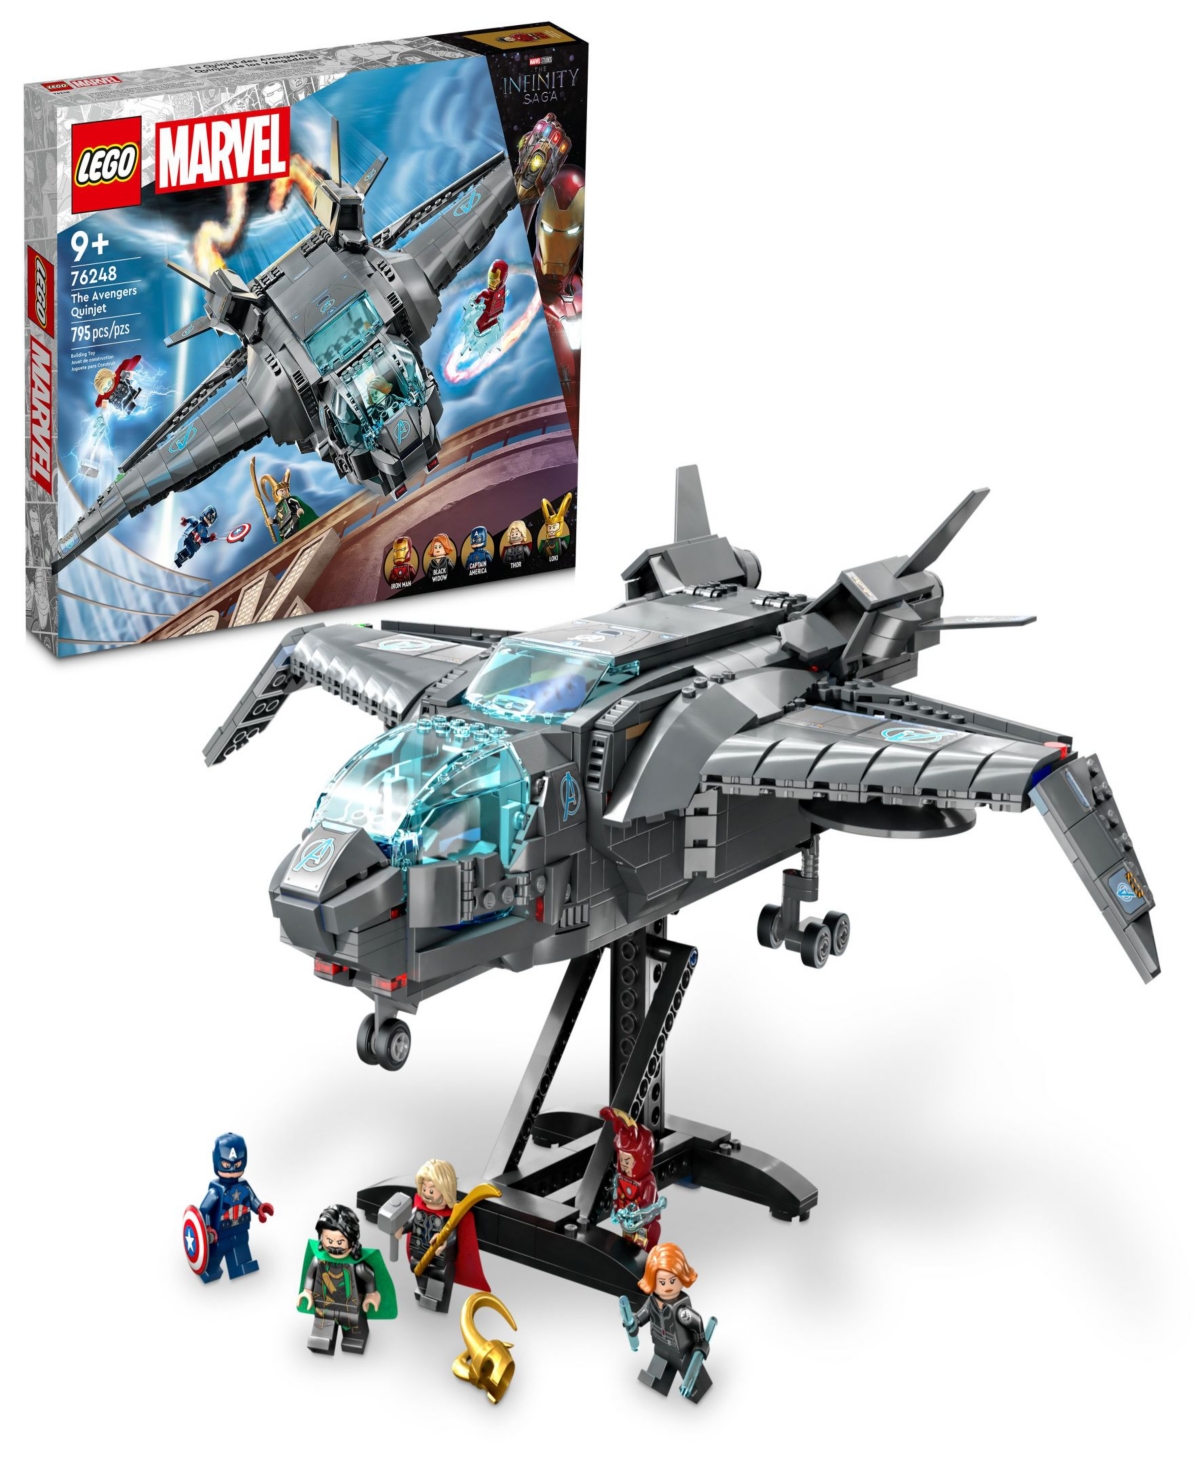 Lego Babies' Marvel 76248 The Avengers Quinjet Toy Building Set With Black Widow, Thor, Iron Man, Captain America In Multicolor